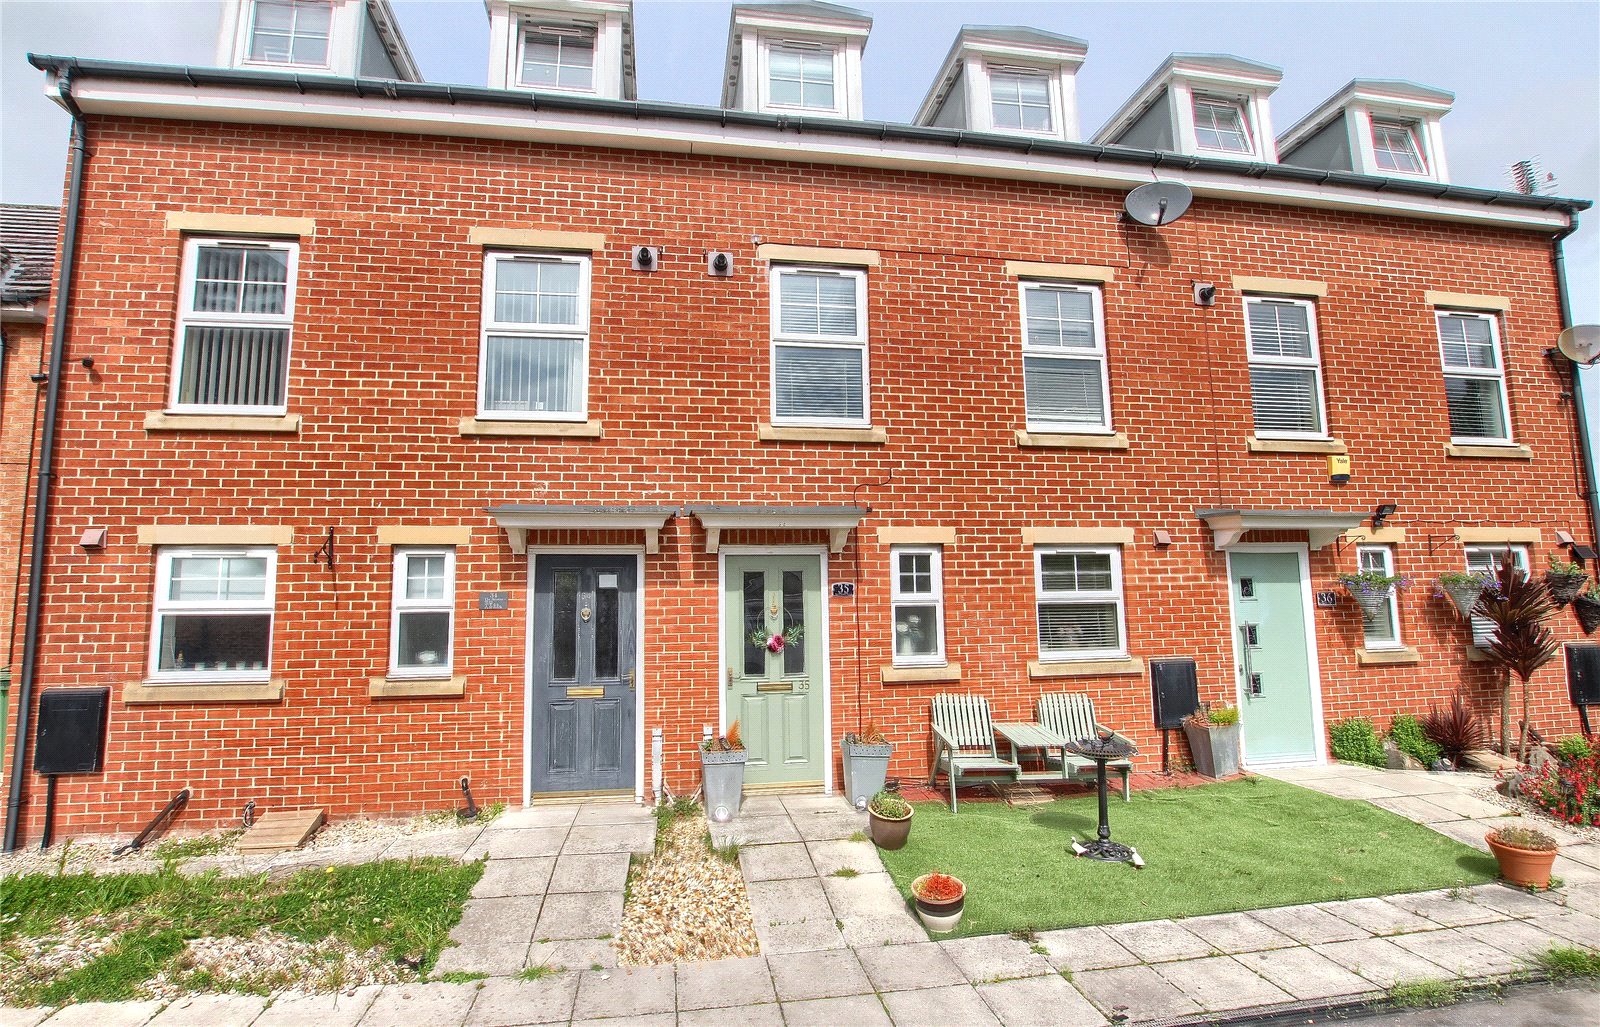 3 bed house to rent in Richmond Place, Thornaby - Property Image 1